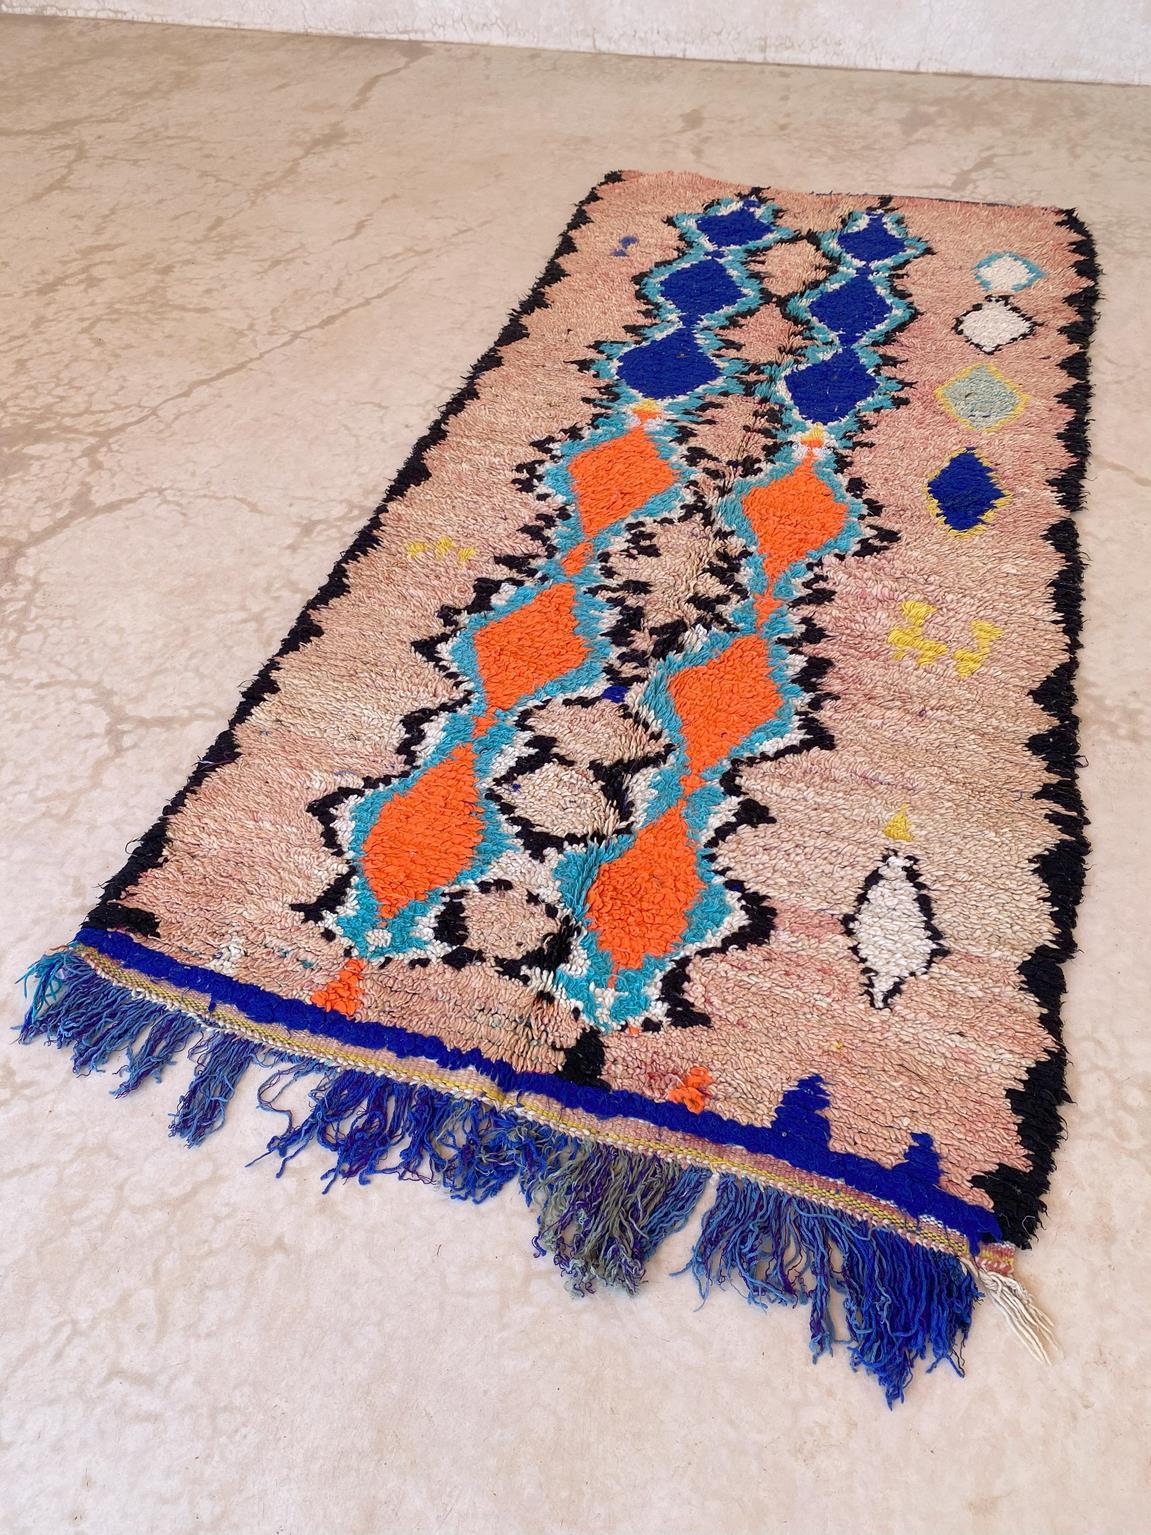 Vintage Moroccan Azilal rug - Salmon/blue - 4.3x9.6feet / 132x295cm For Sale 4